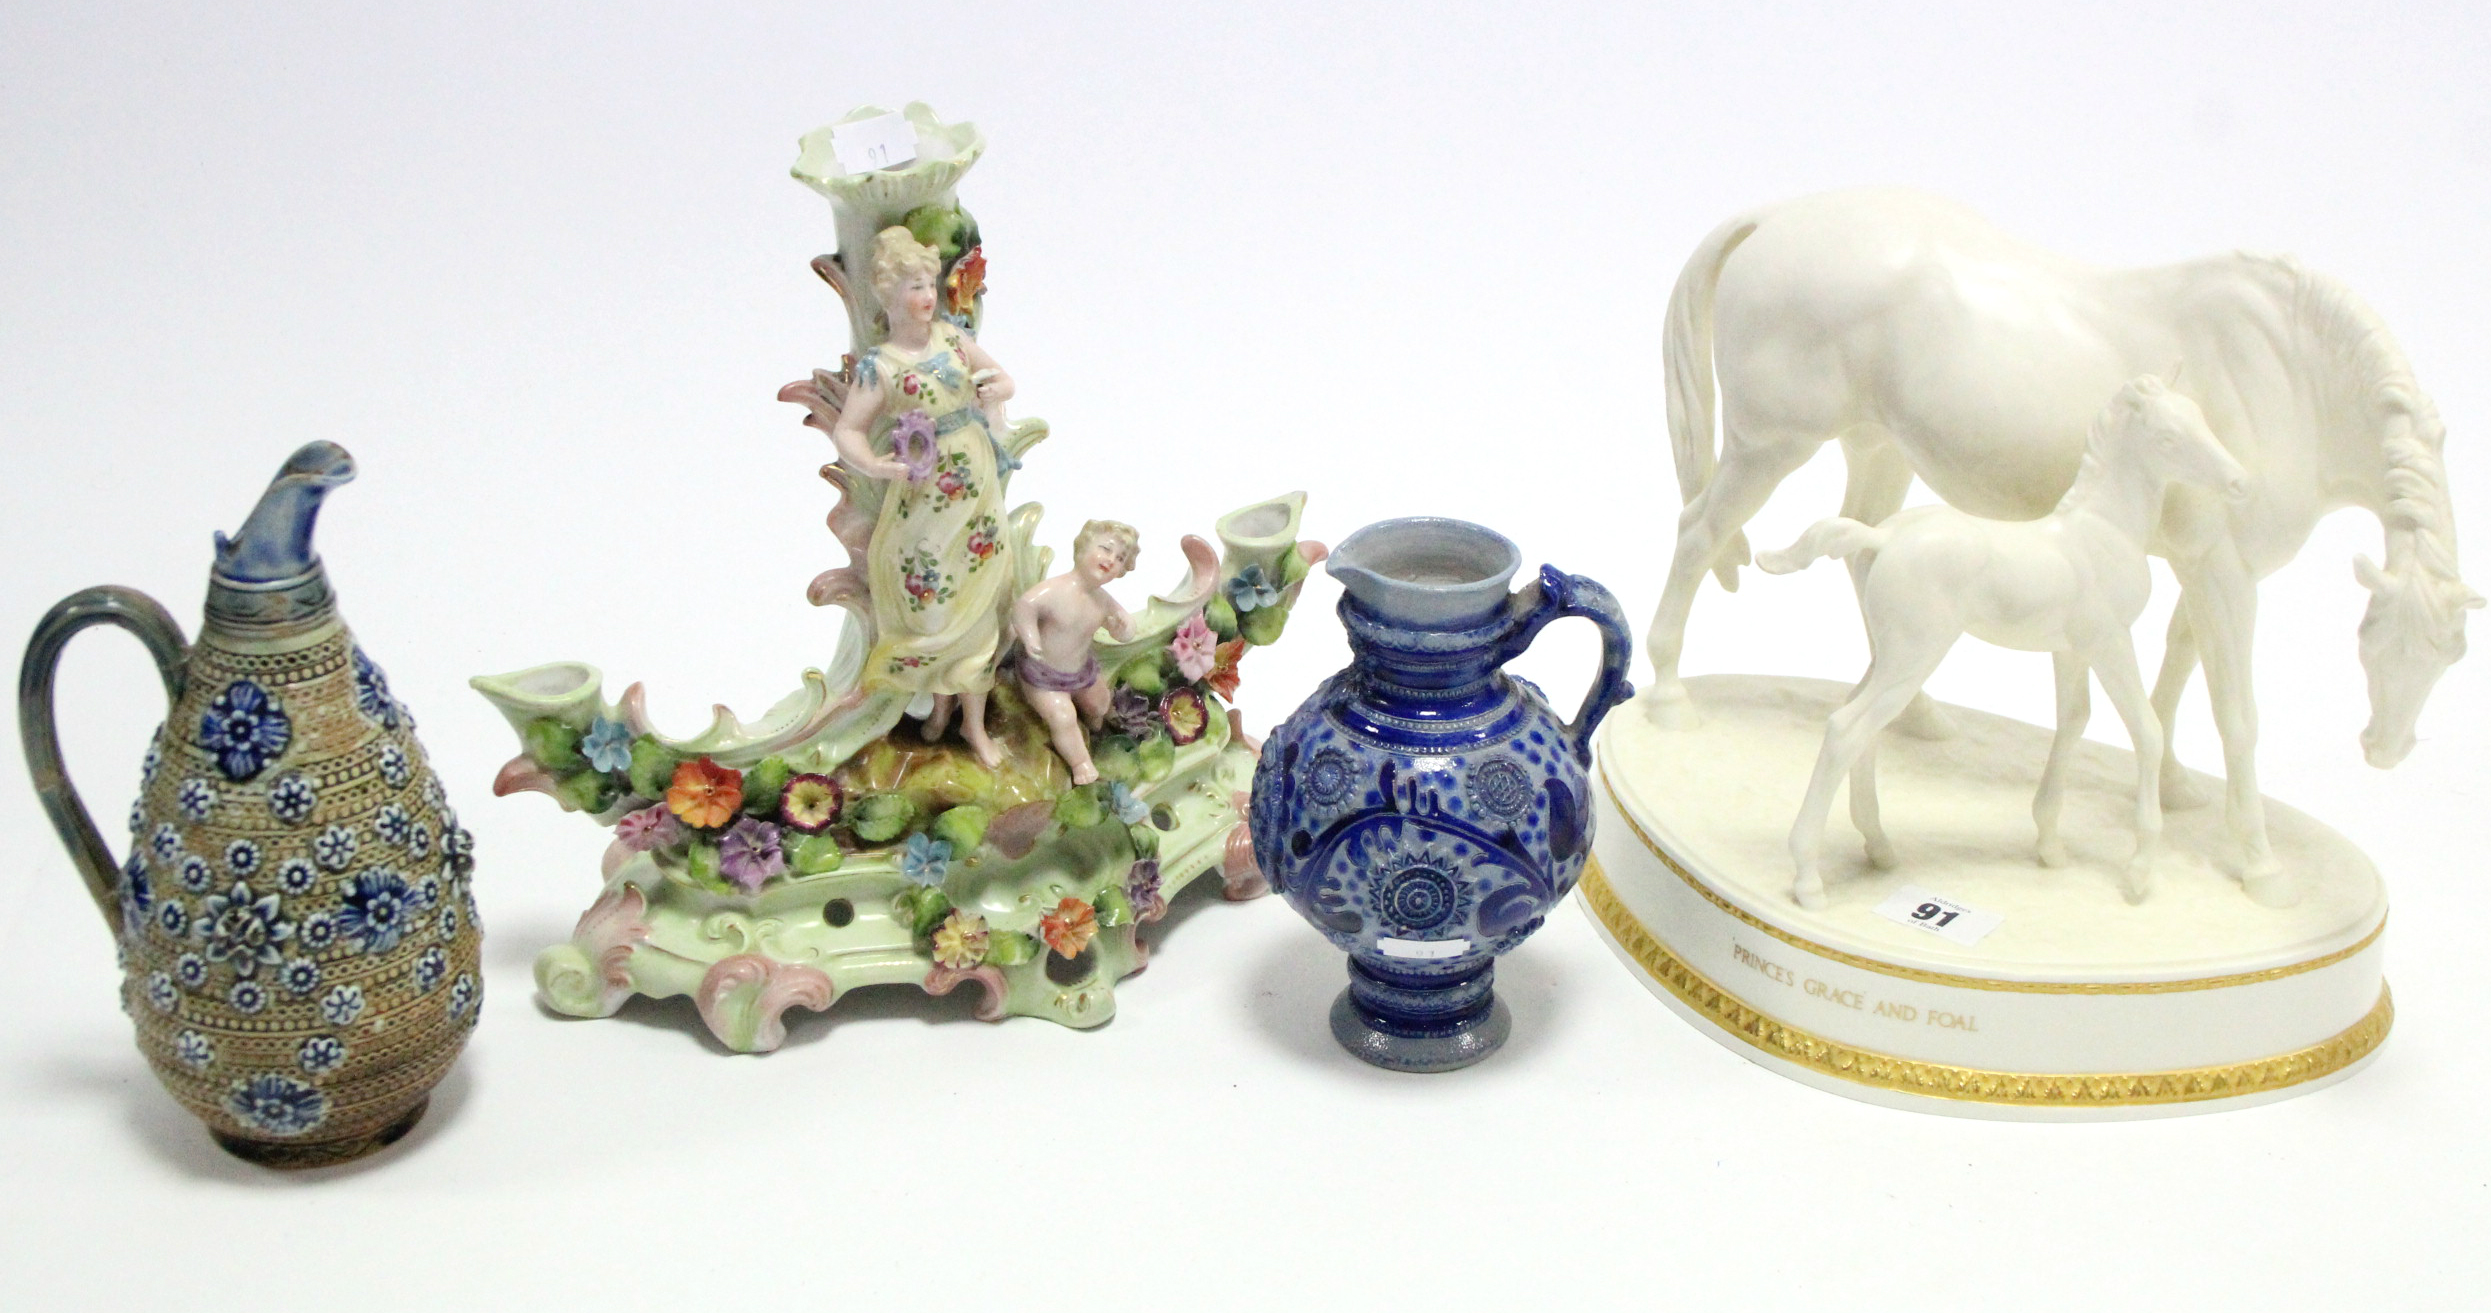 A Royal Worcester bone china limited edition classic sculpture titled: “Prince’s Grace & Foal” (Ltd.